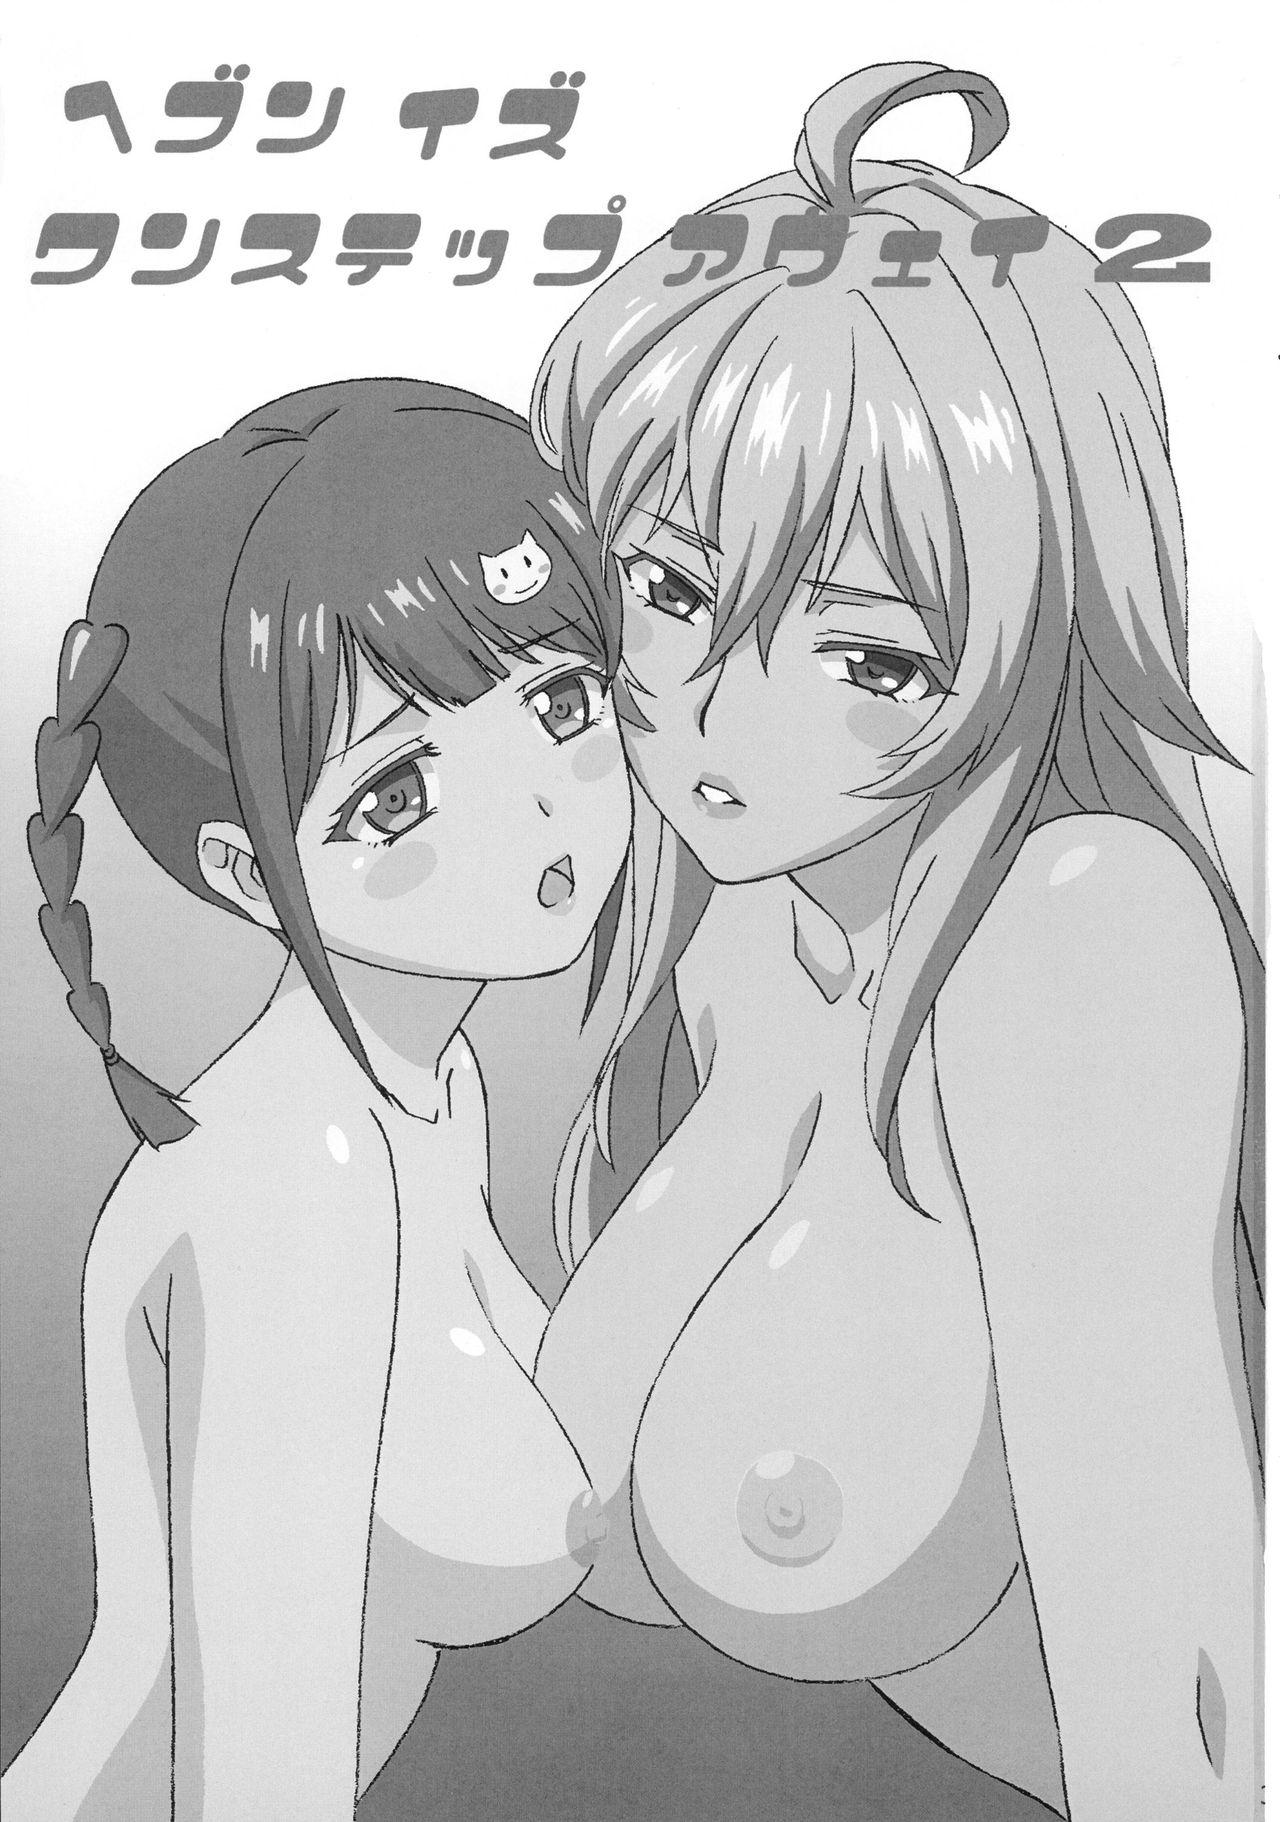 1080p Heaven is one step away 2 - Valkyrie drive Sexo - Page 3